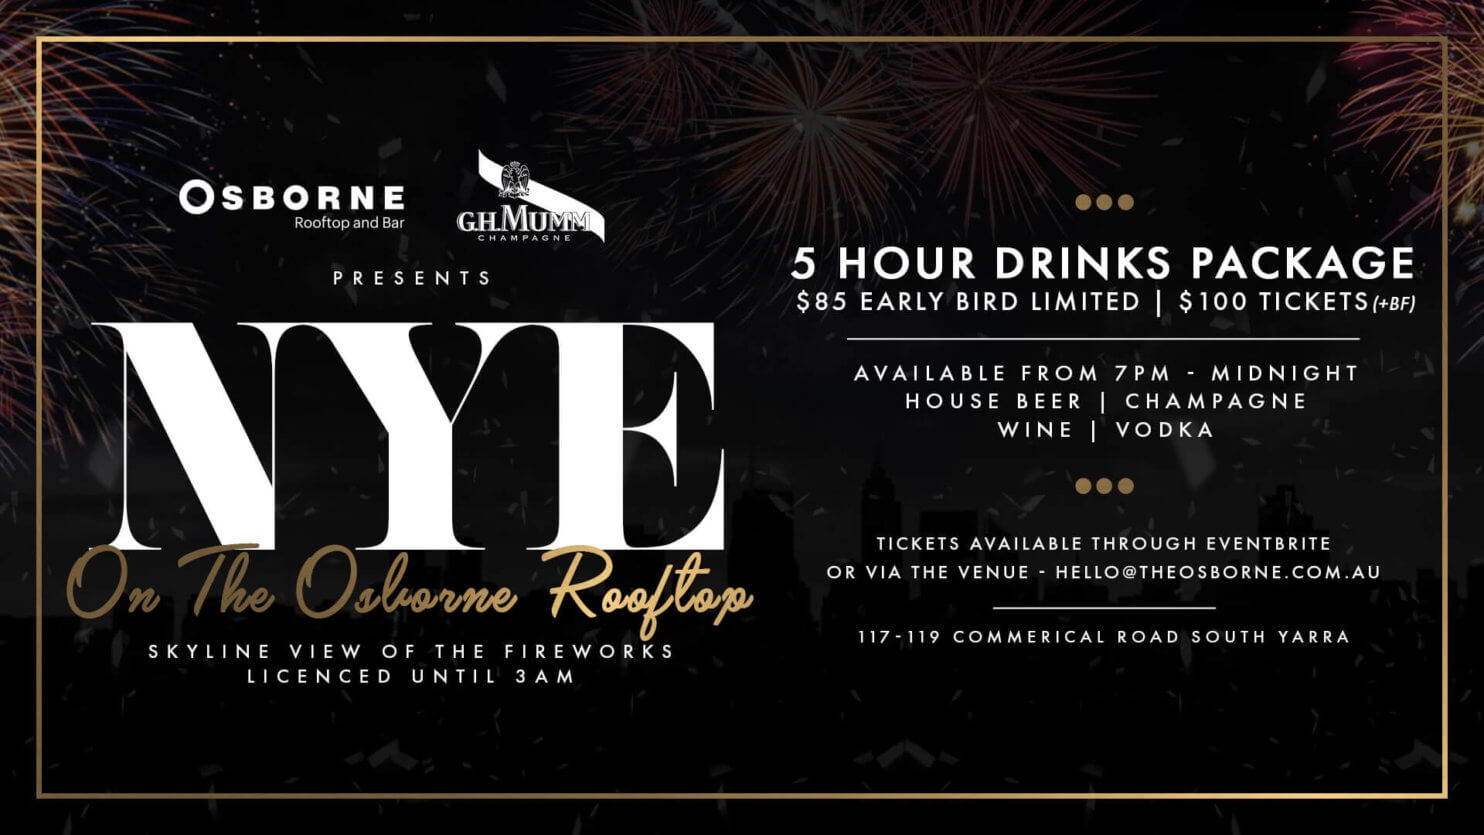 New Years Eve Event Osborne Rooftop South Yarra